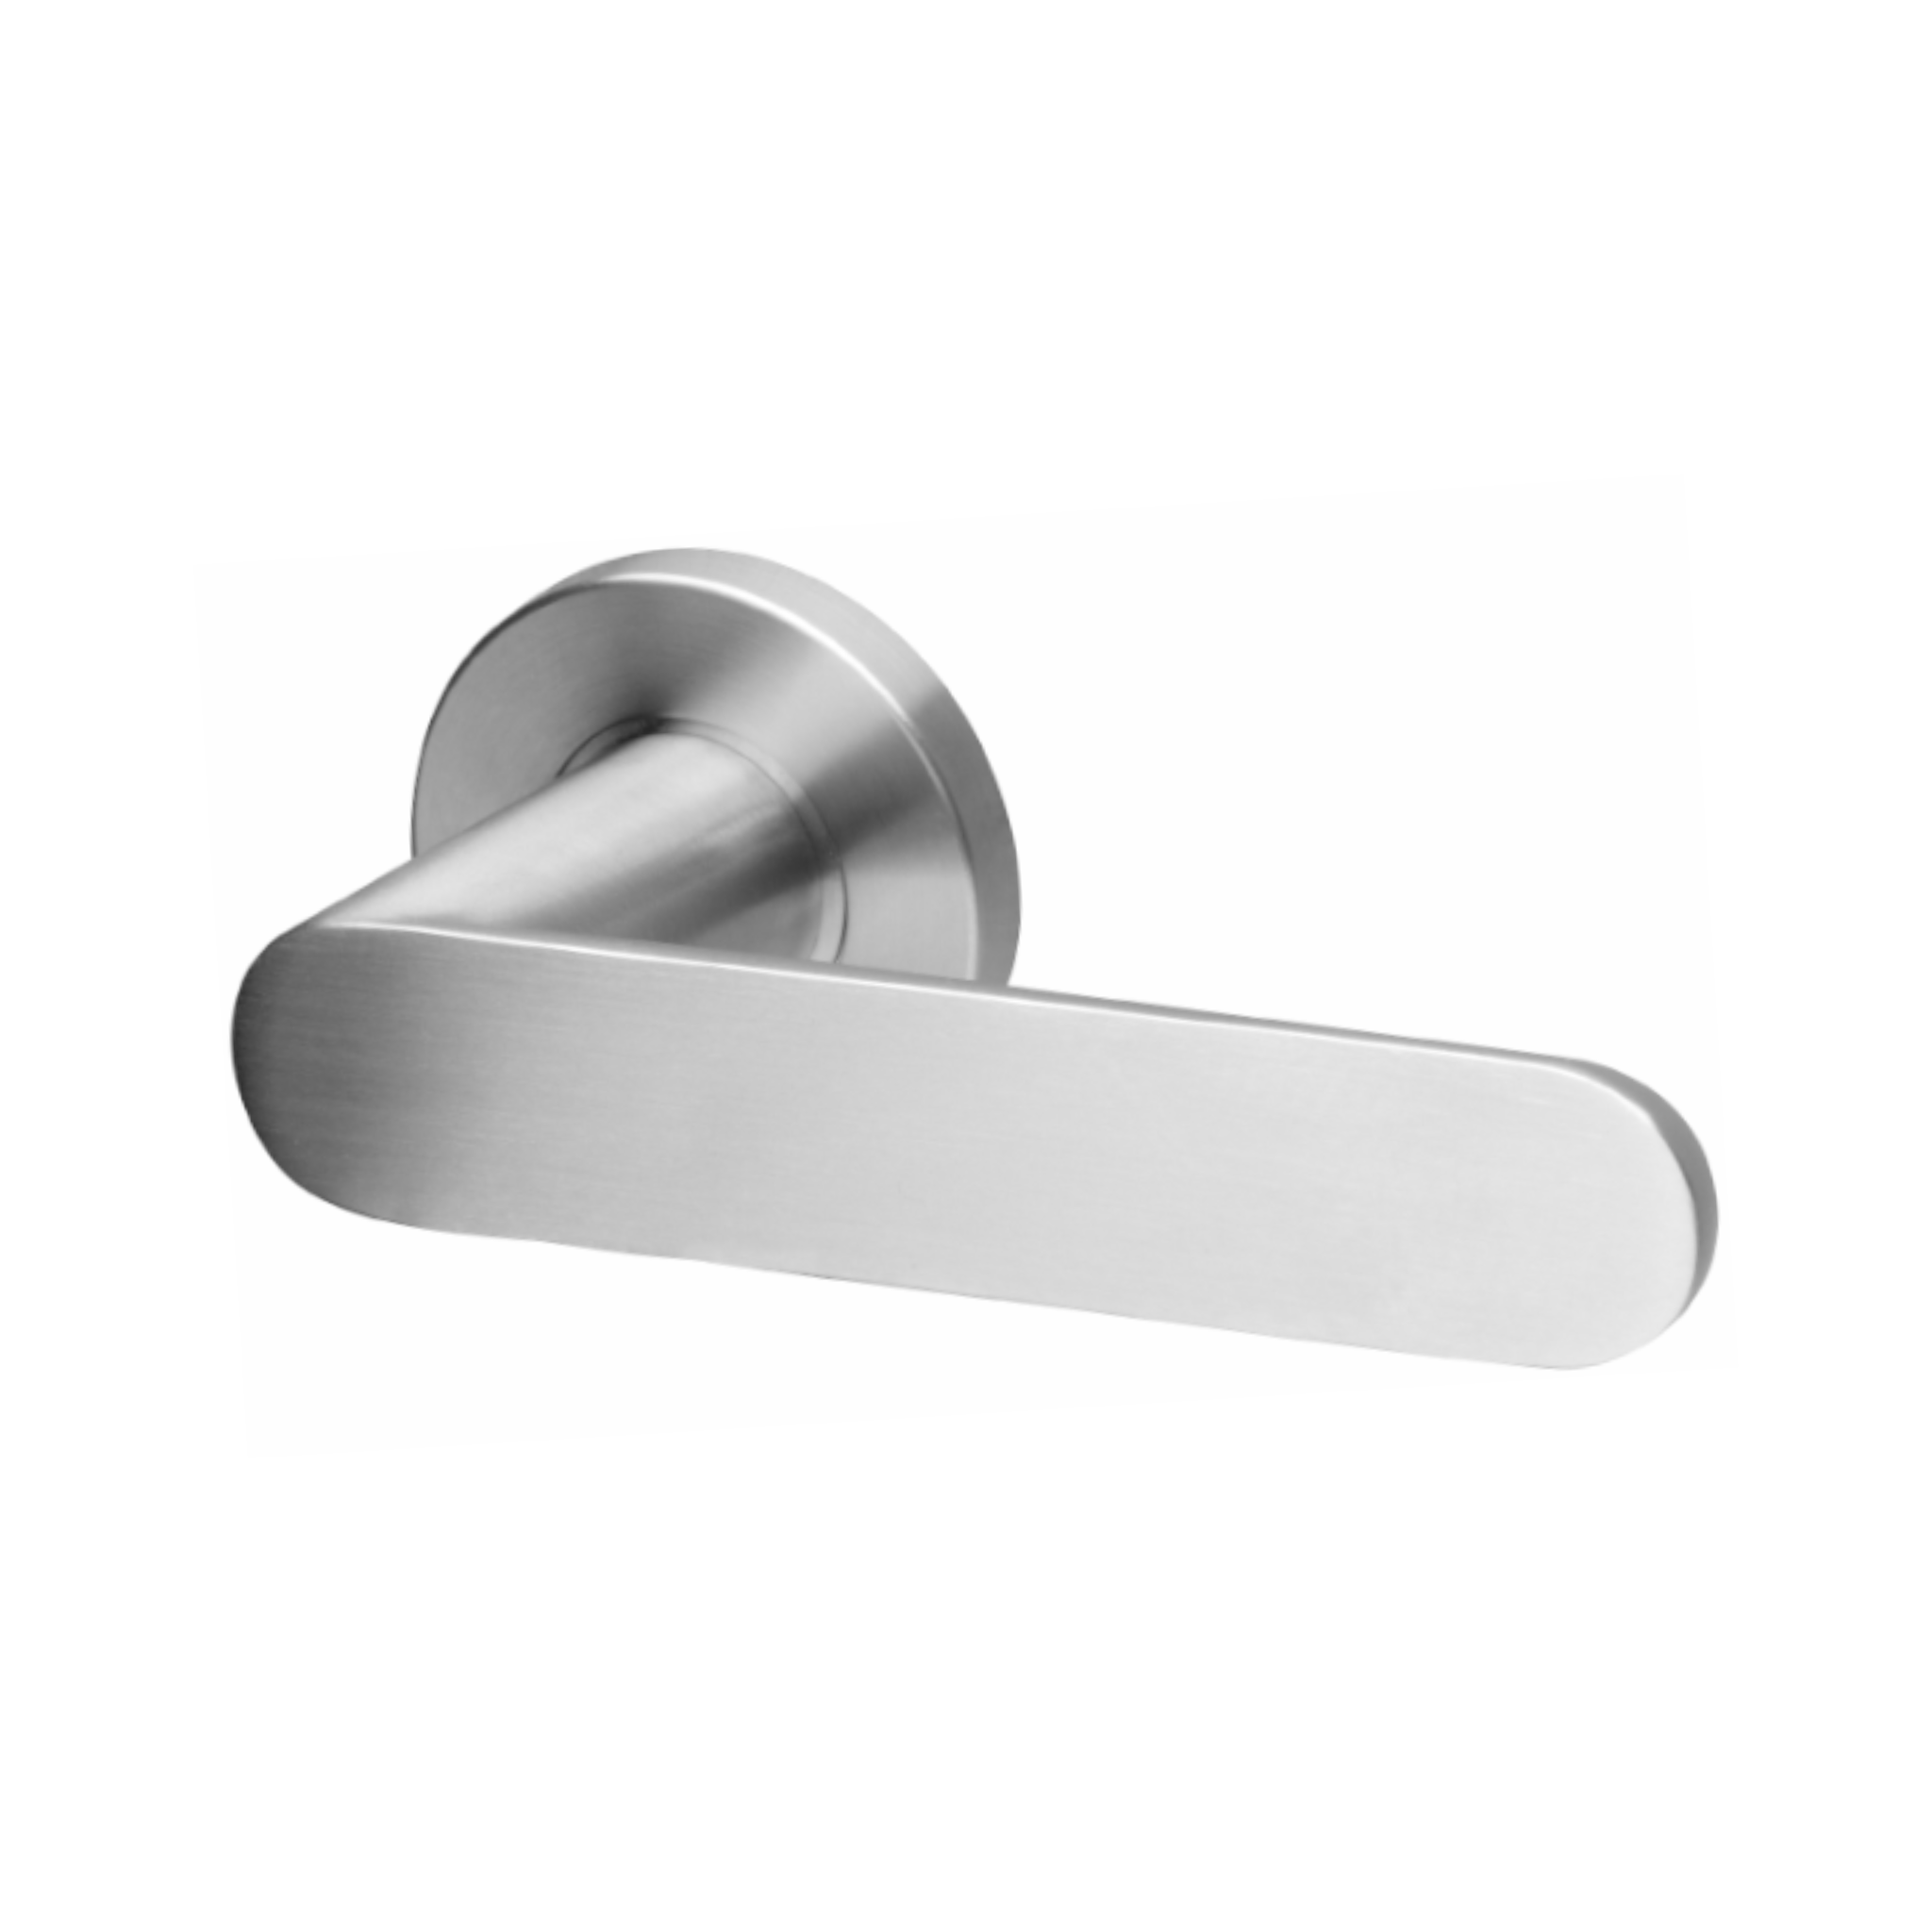 Falon, Lever Handles, Form, On Round Rose, With Escutcheons, Stainless Steel, QS